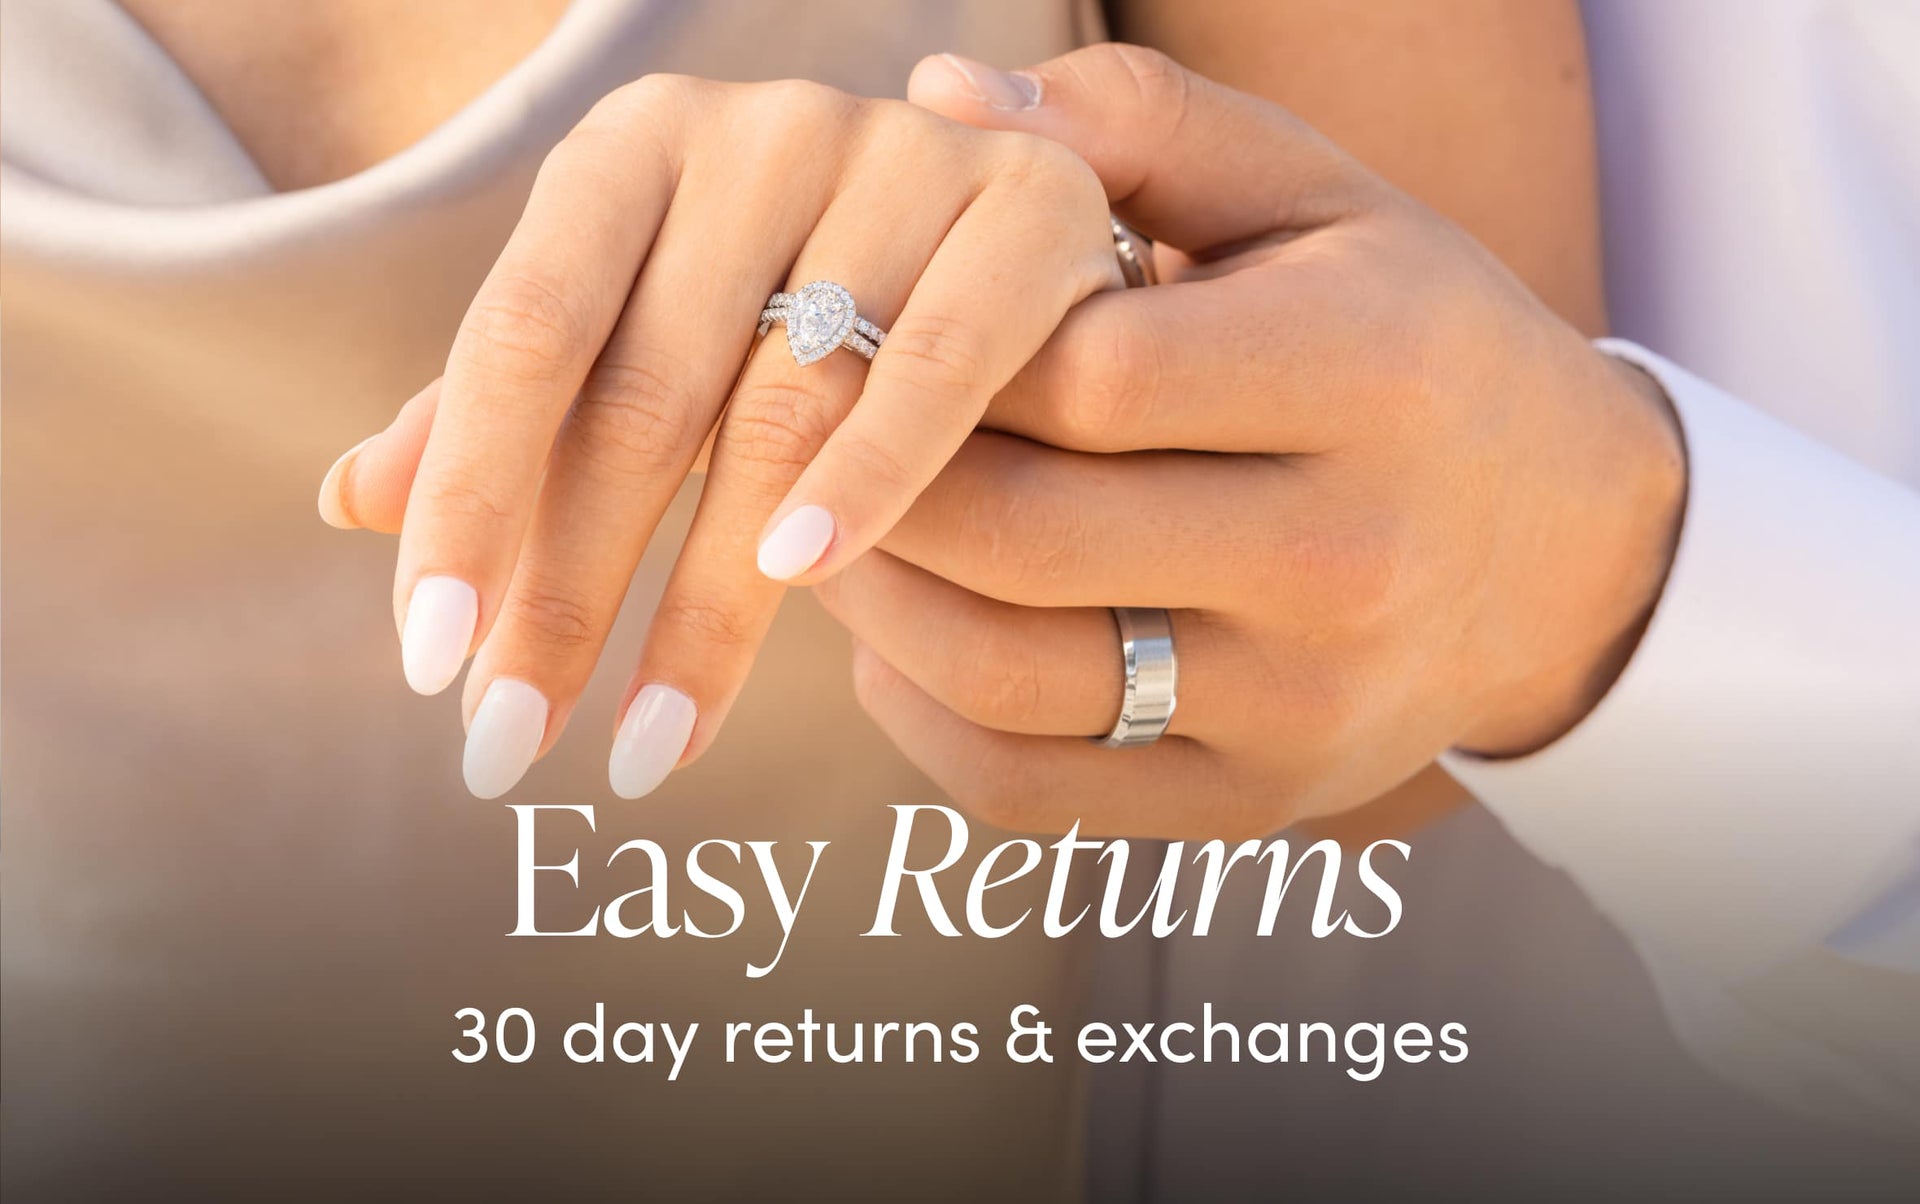 couple holding hands wearing silver wedding rings easy returns and exchanges